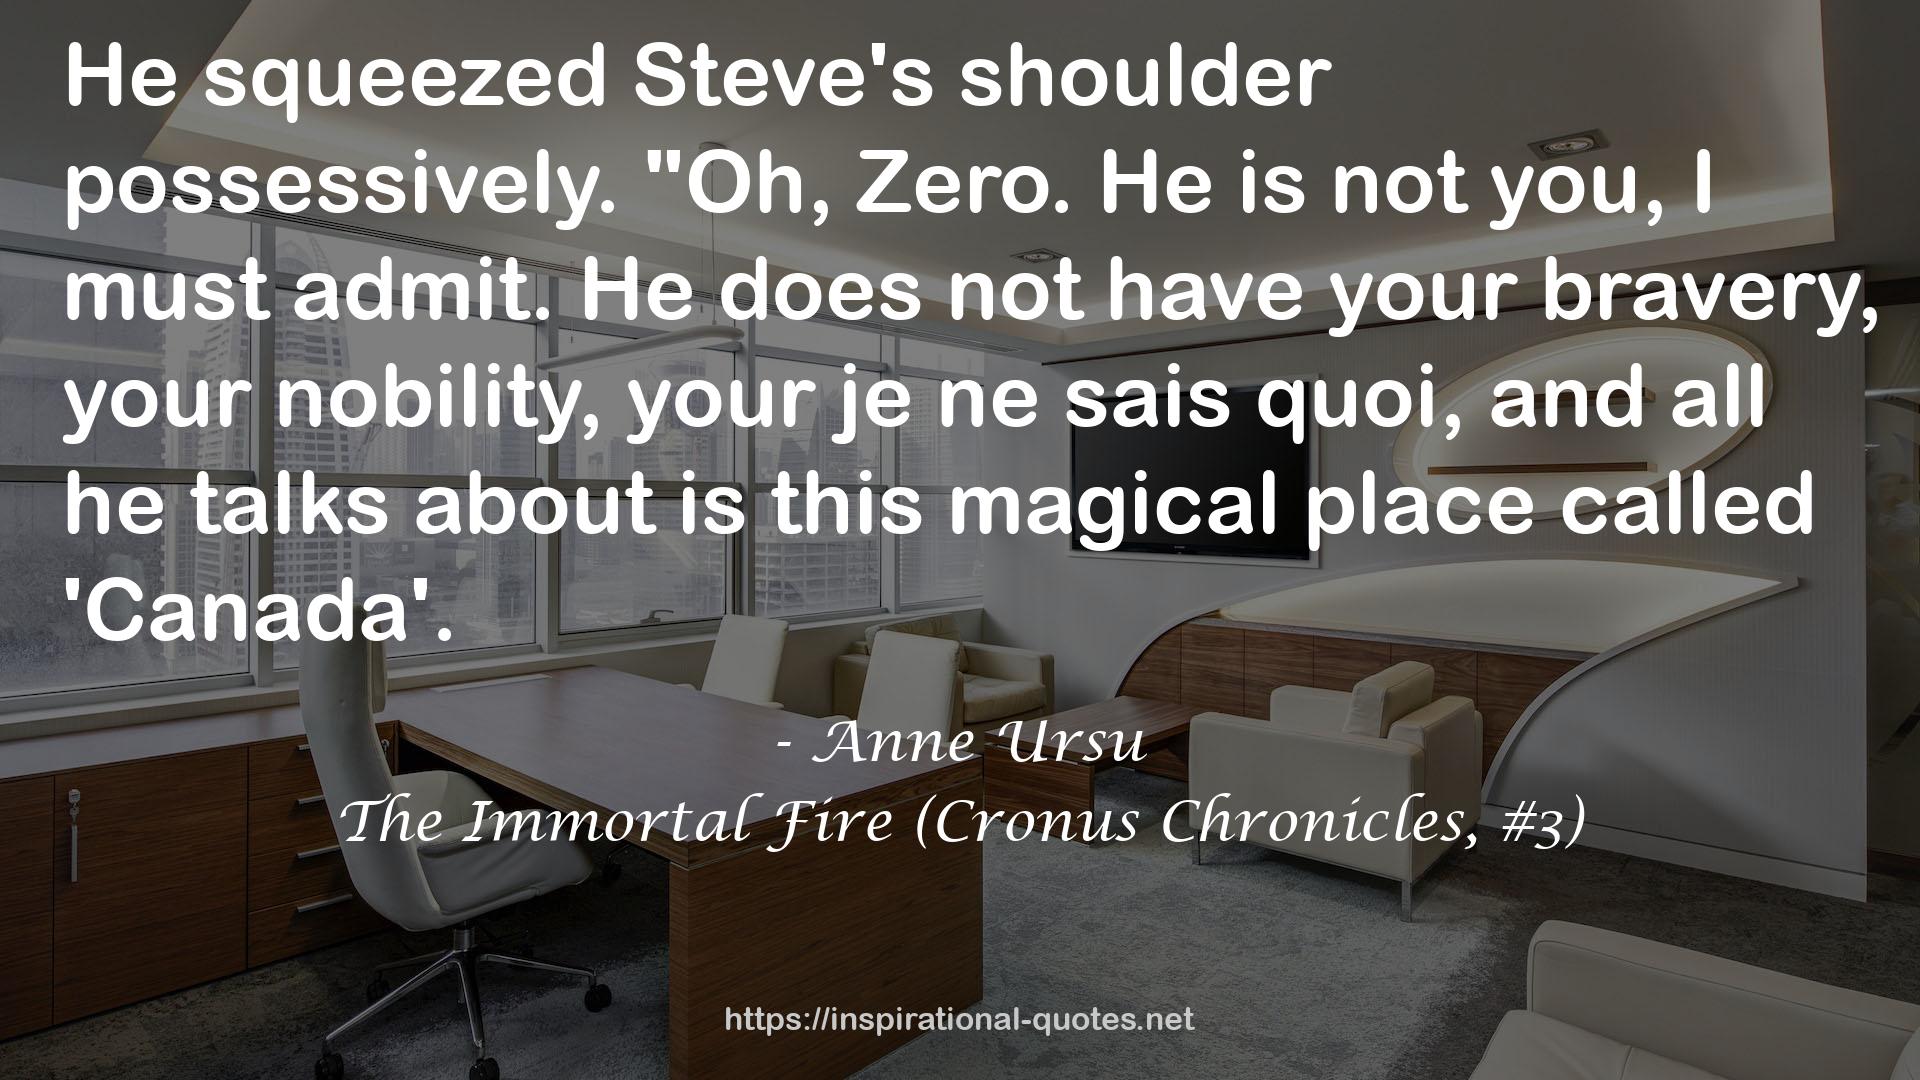 The Immortal Fire (Cronus Chronicles, #3) QUOTES